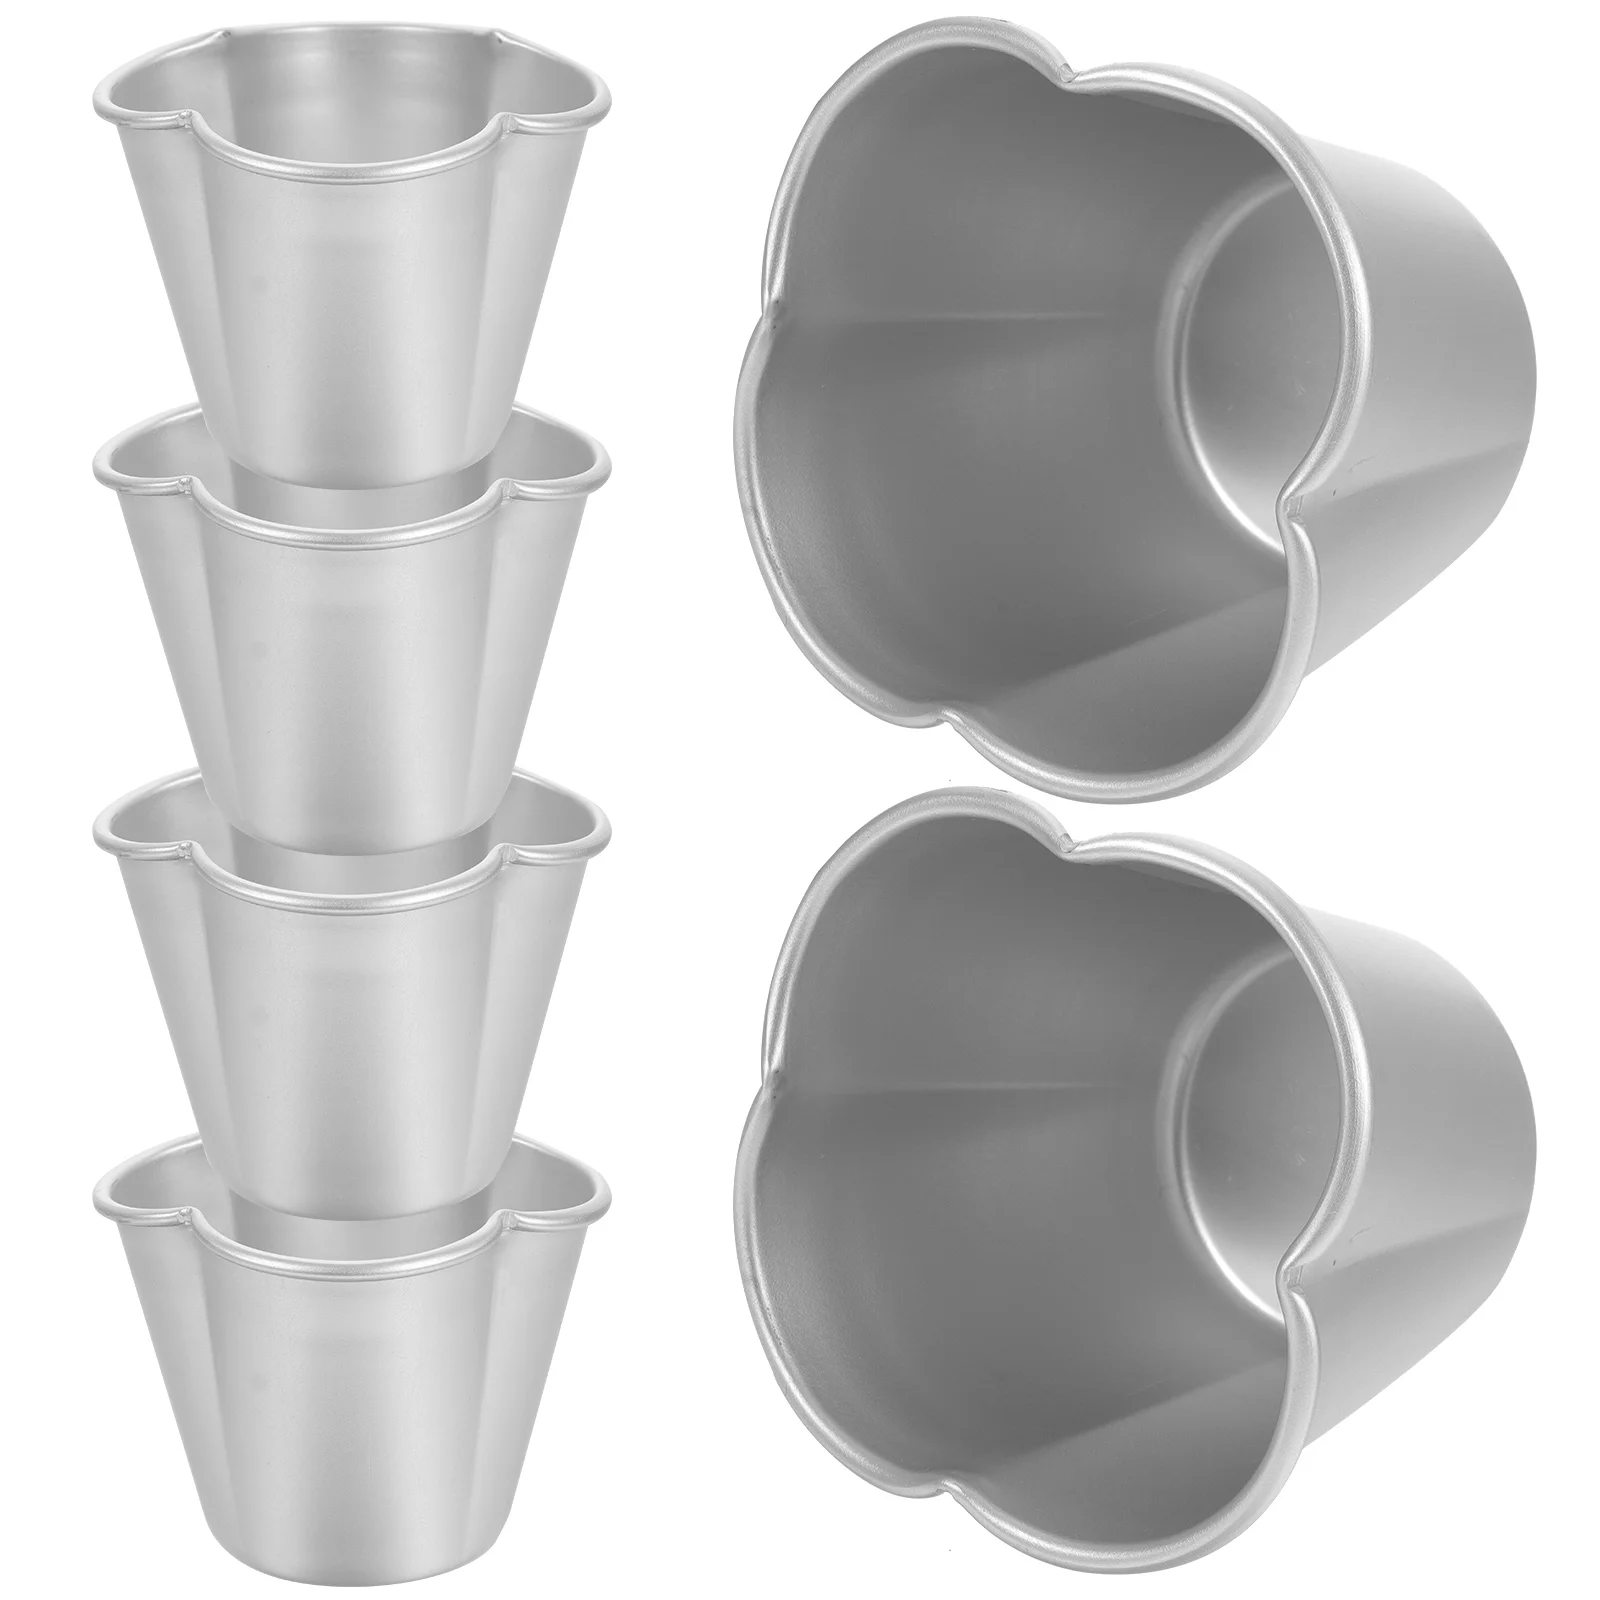 

Tart Egg Pan Molds Mini Baking Pie Ramekins Cups Tins Pans Pudding Cupcake Cake Cheese Tartlet Quiche Wrapper Muffin Tray Liners